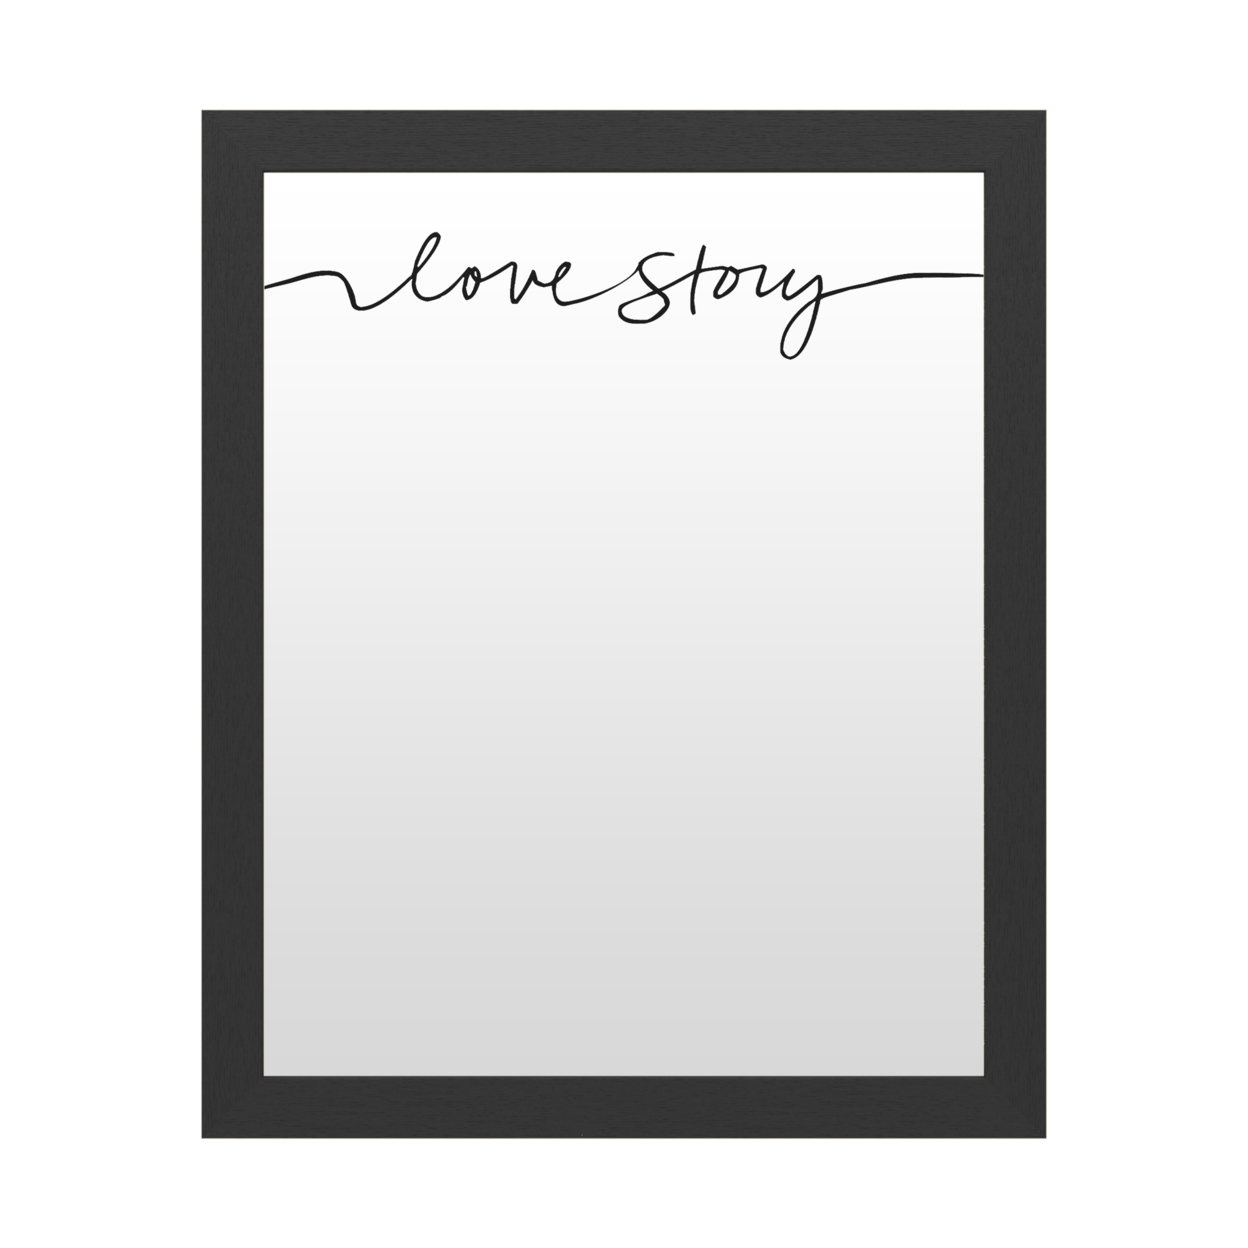 Dry Erase 16 X 20 Marker Board With Printed Artwork - Design Fabrikken Love Story Fabrikken White Board - Ready To Hang